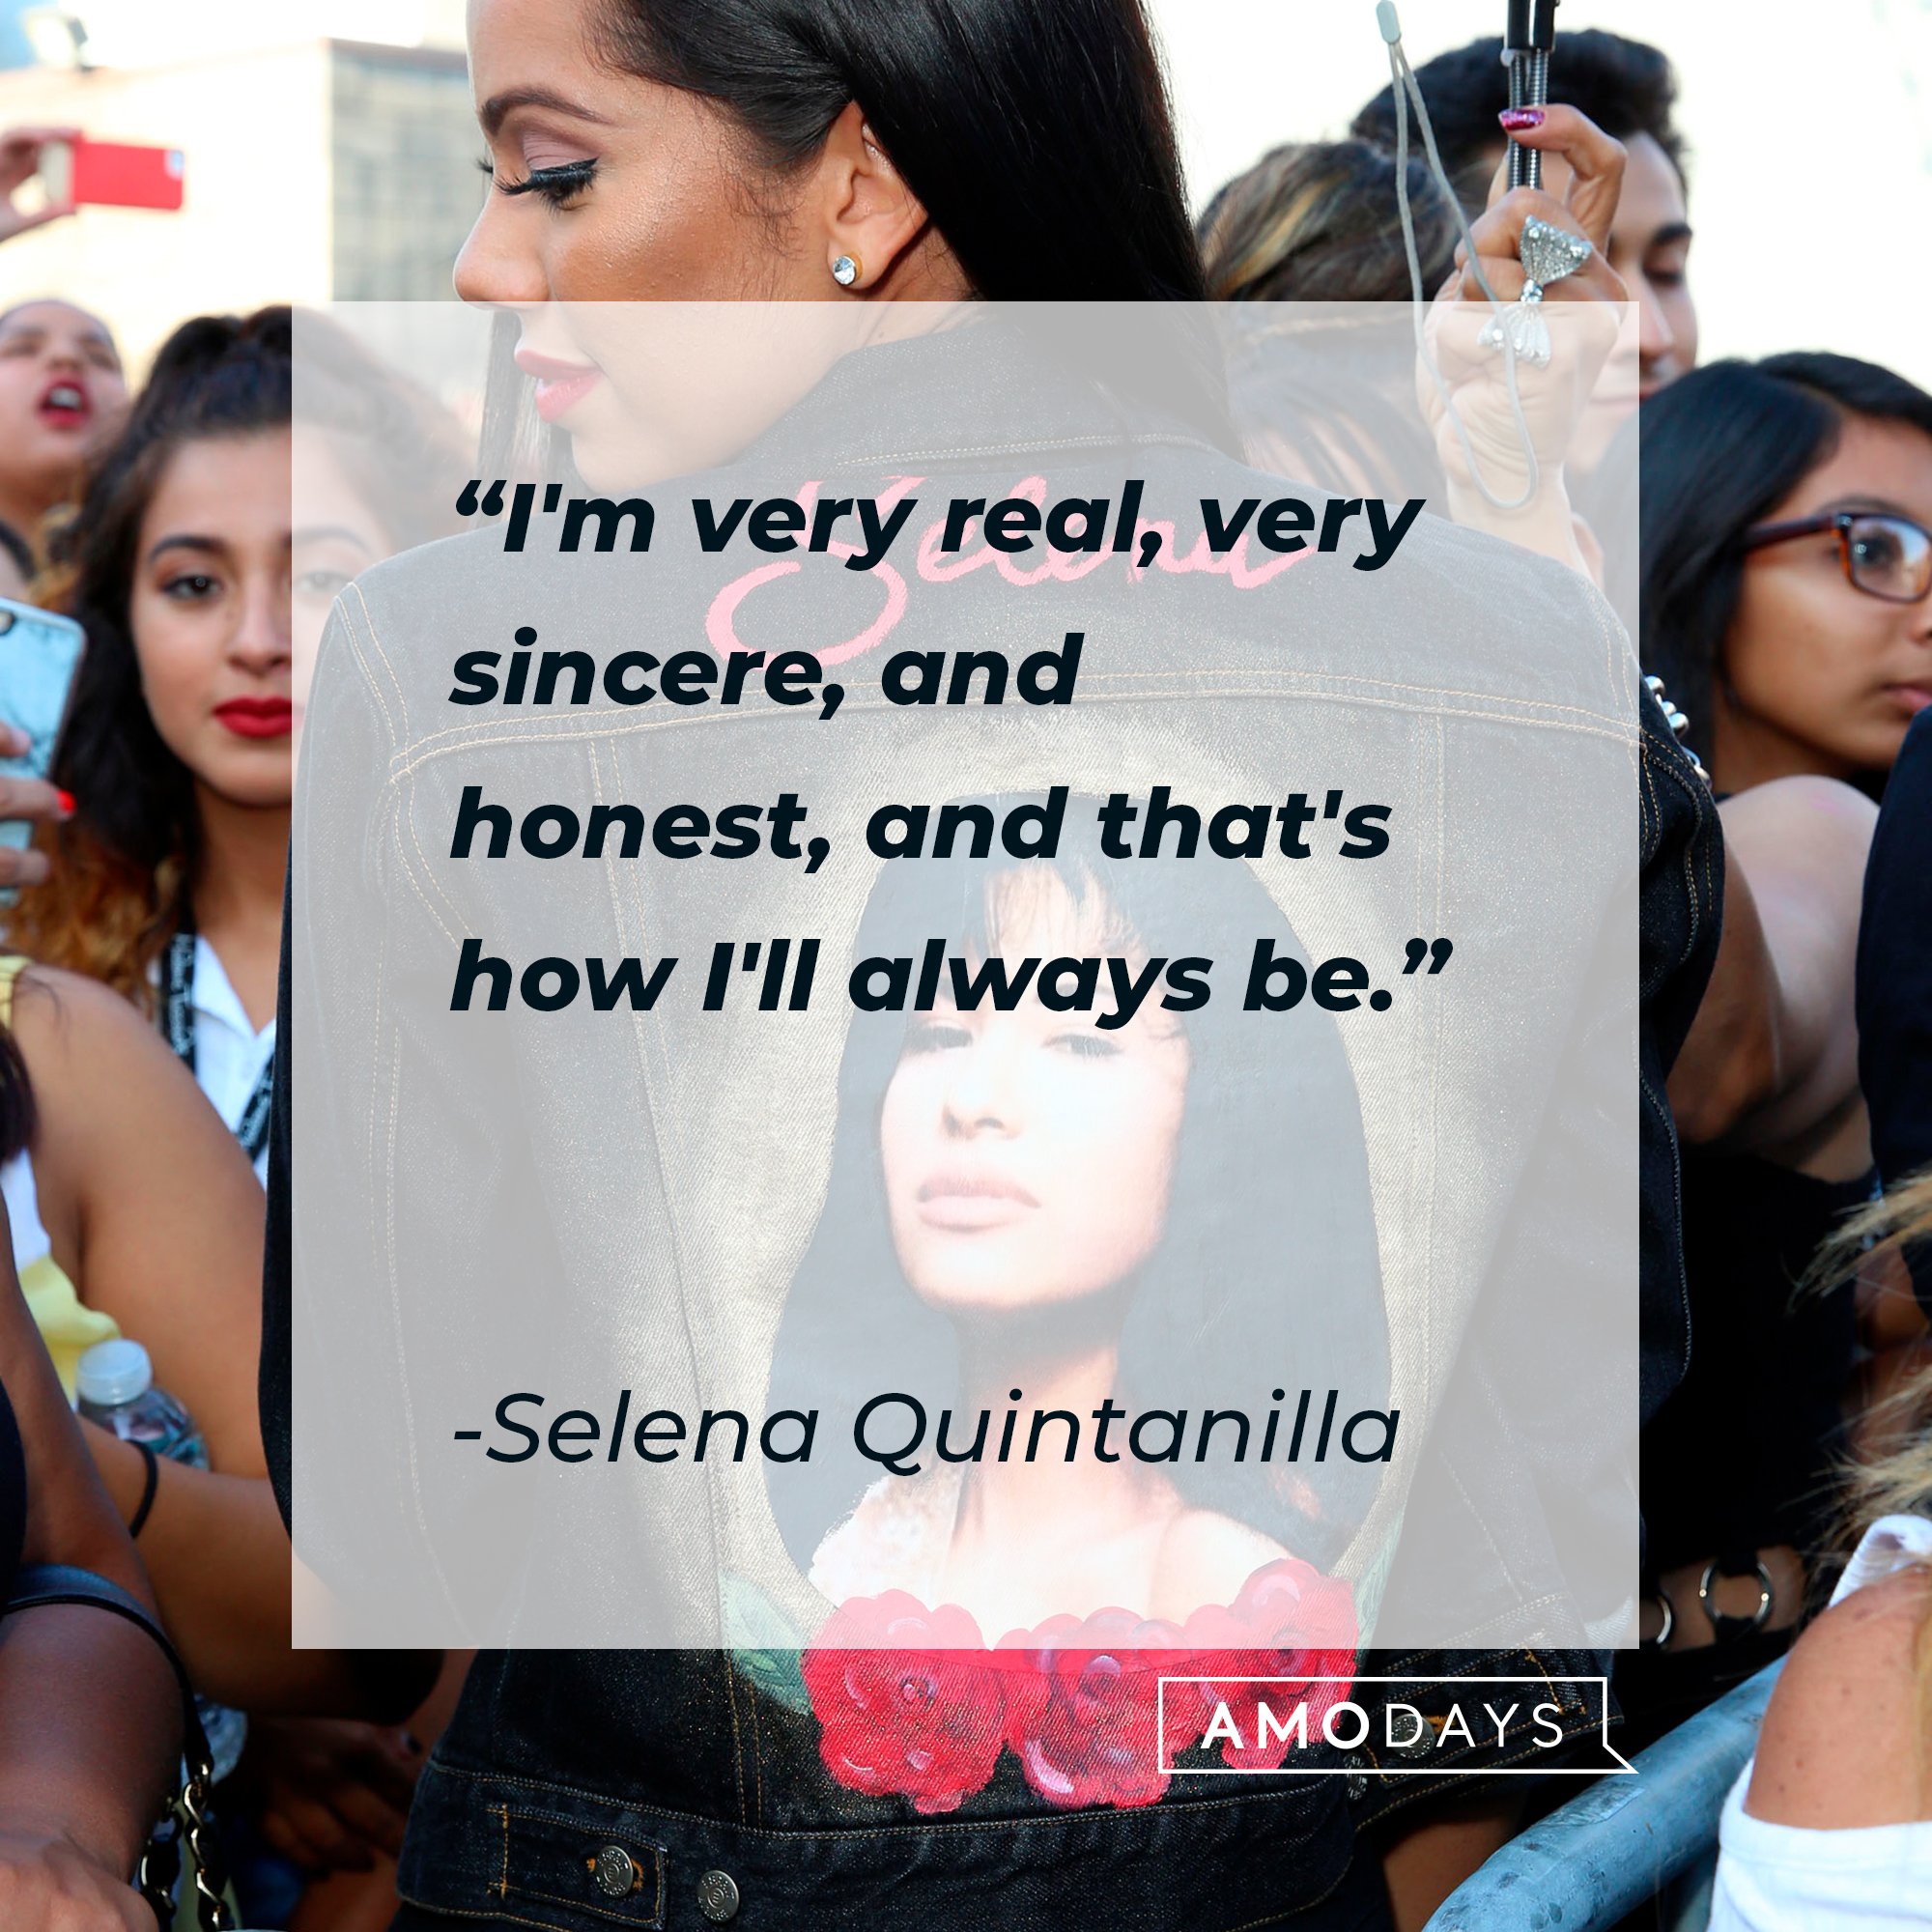 Selena Quintanilla's quote: "I'm very real, very sincere, and honest, and that's how I'll always be.” | Image: AmoDays